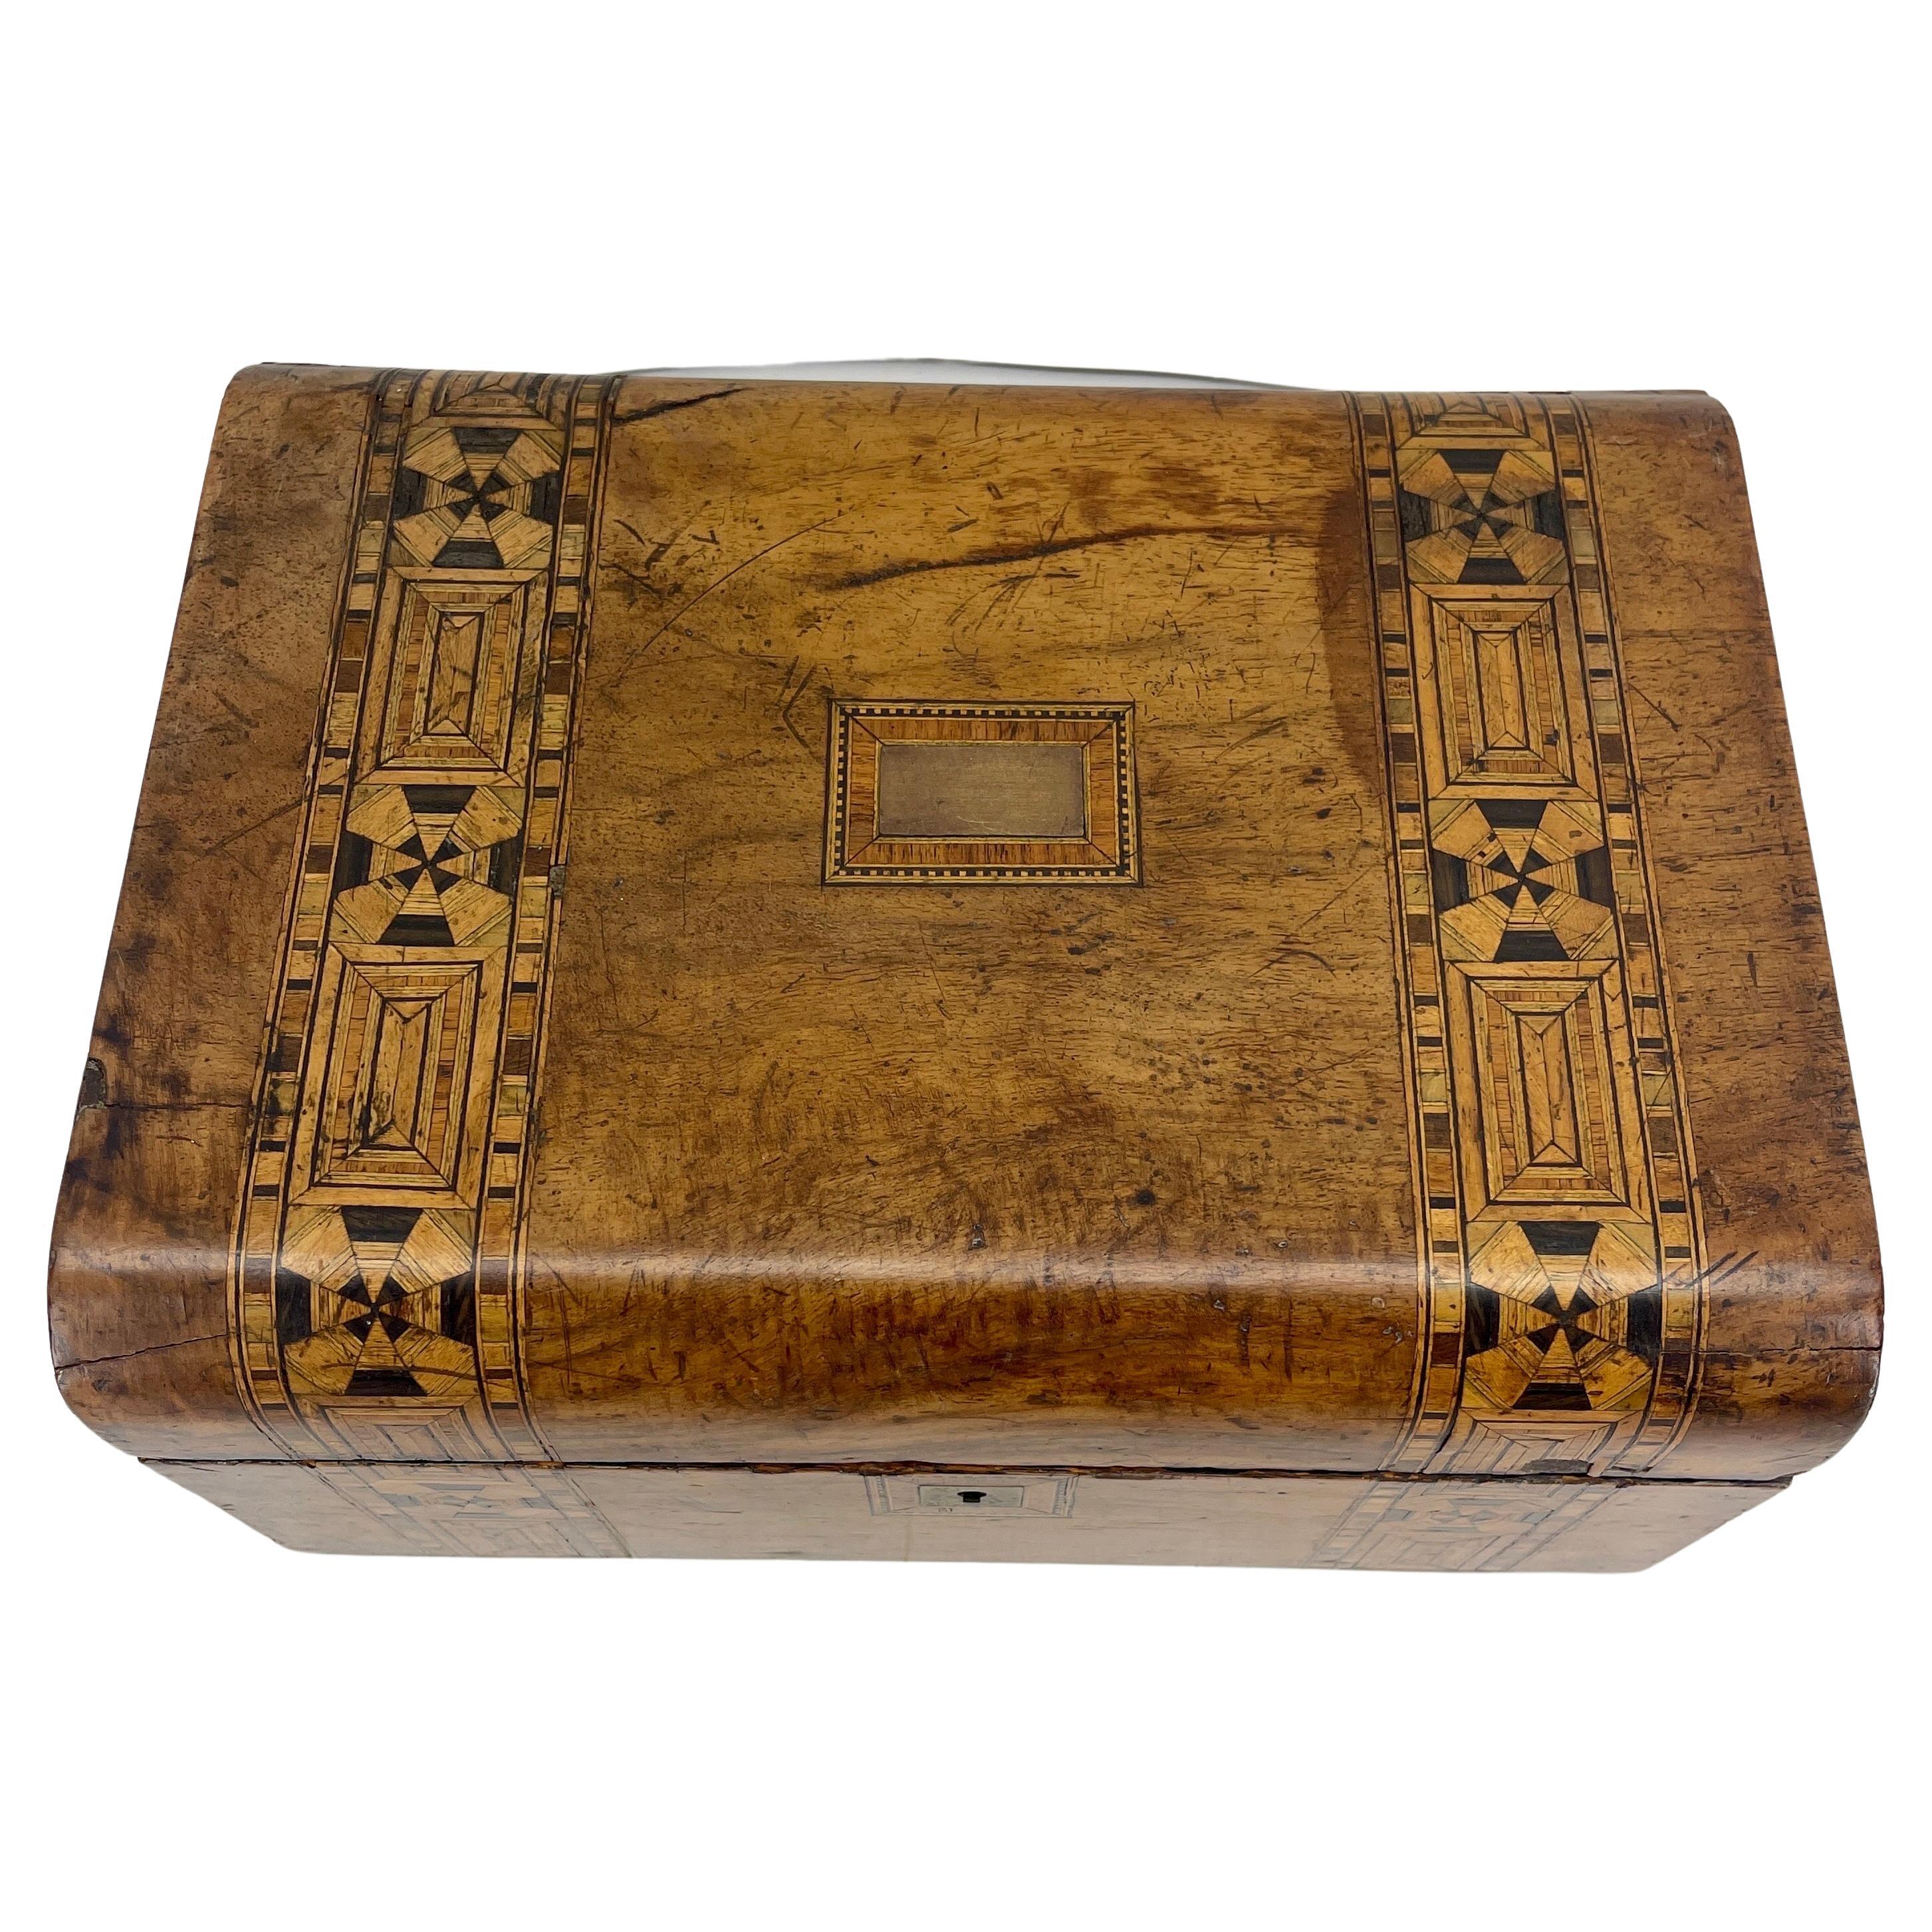 Karl Johan Swedish Inlaid Fruitwood and Veneered Box with Curved Top Early 19th Century For Sale